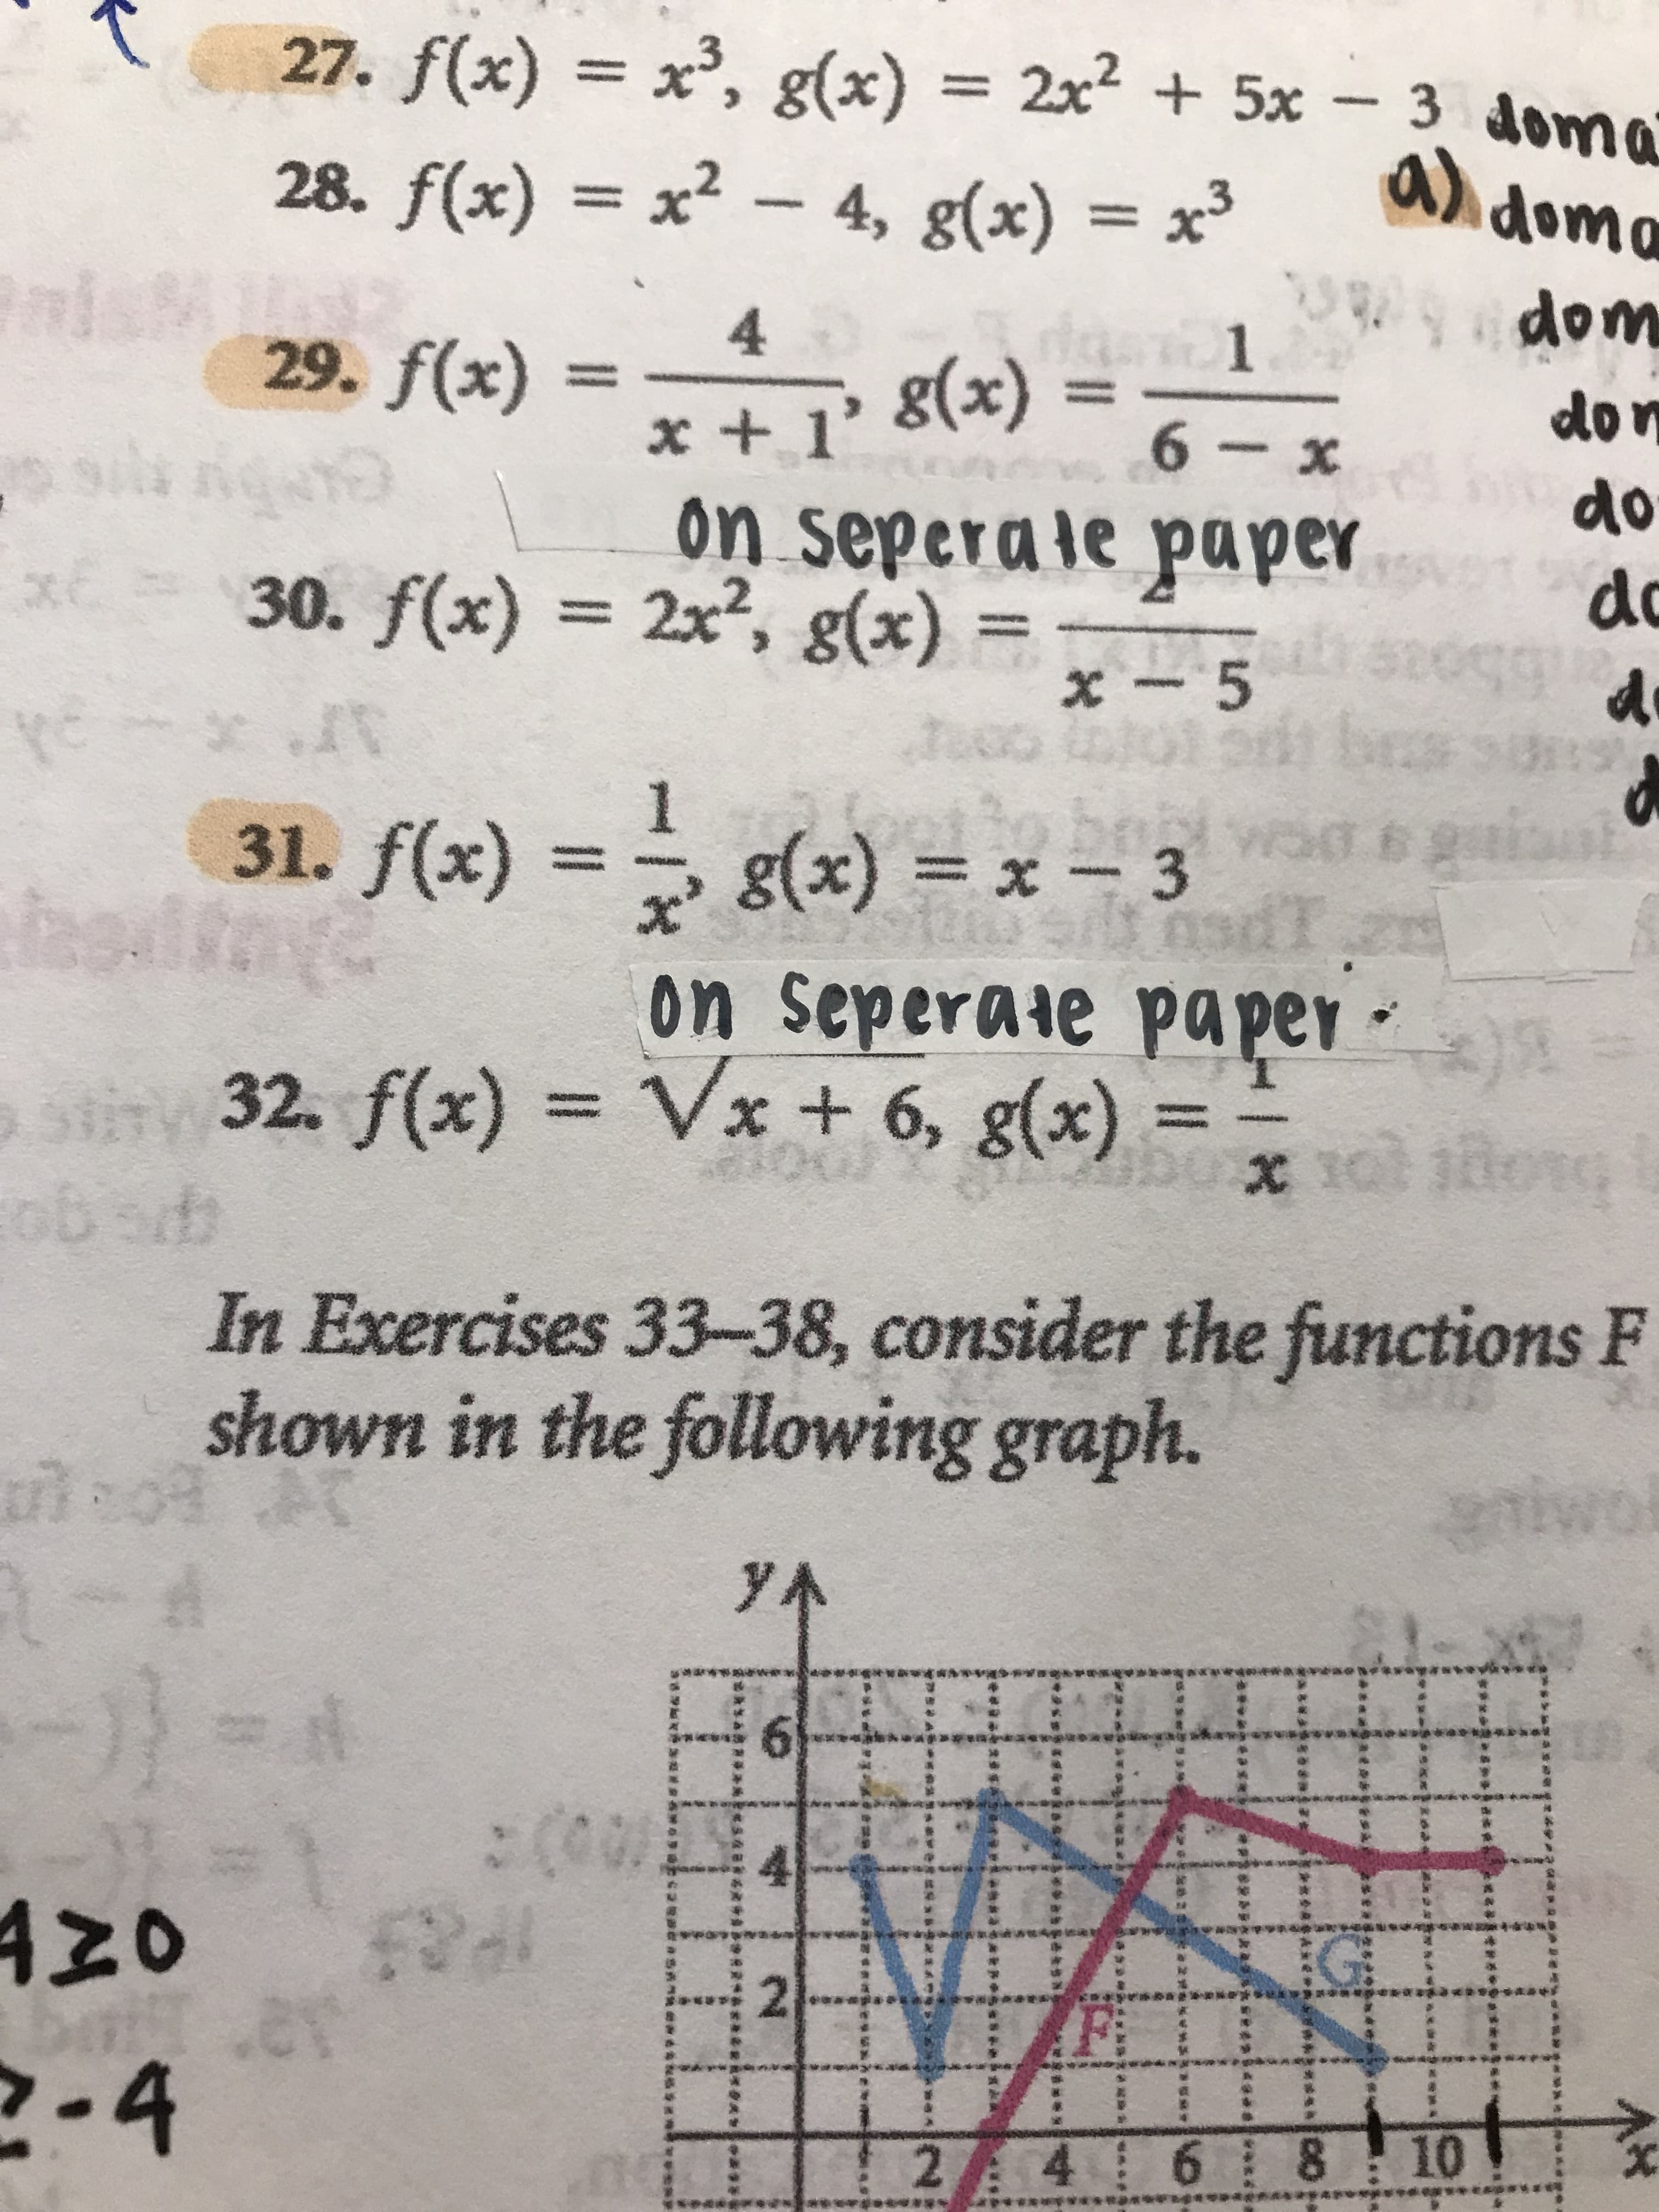 2.
2 4 6 8
-9
12
..
96.
In Exercises 33-38, consider the functions F
s go
shown in the following graph.
32. f(x) = Vx + 6, g(x).
on seperate paper -
65
31. f(x) = g(x) = x – 3
5.
1
x - 5
= (x)8 x7
on seperale paper
+x+
%3D
on
X -9
30. f(x) = 2x², g(x)
= (x)8 «I + x
+ 1'
4.
wop
%3D
29. f(x)
%3D
%3D
28. f(x) = x² – 4, g(x) = x³
27. f(x) x', g(x) = 2x + 5x - 3 doma
